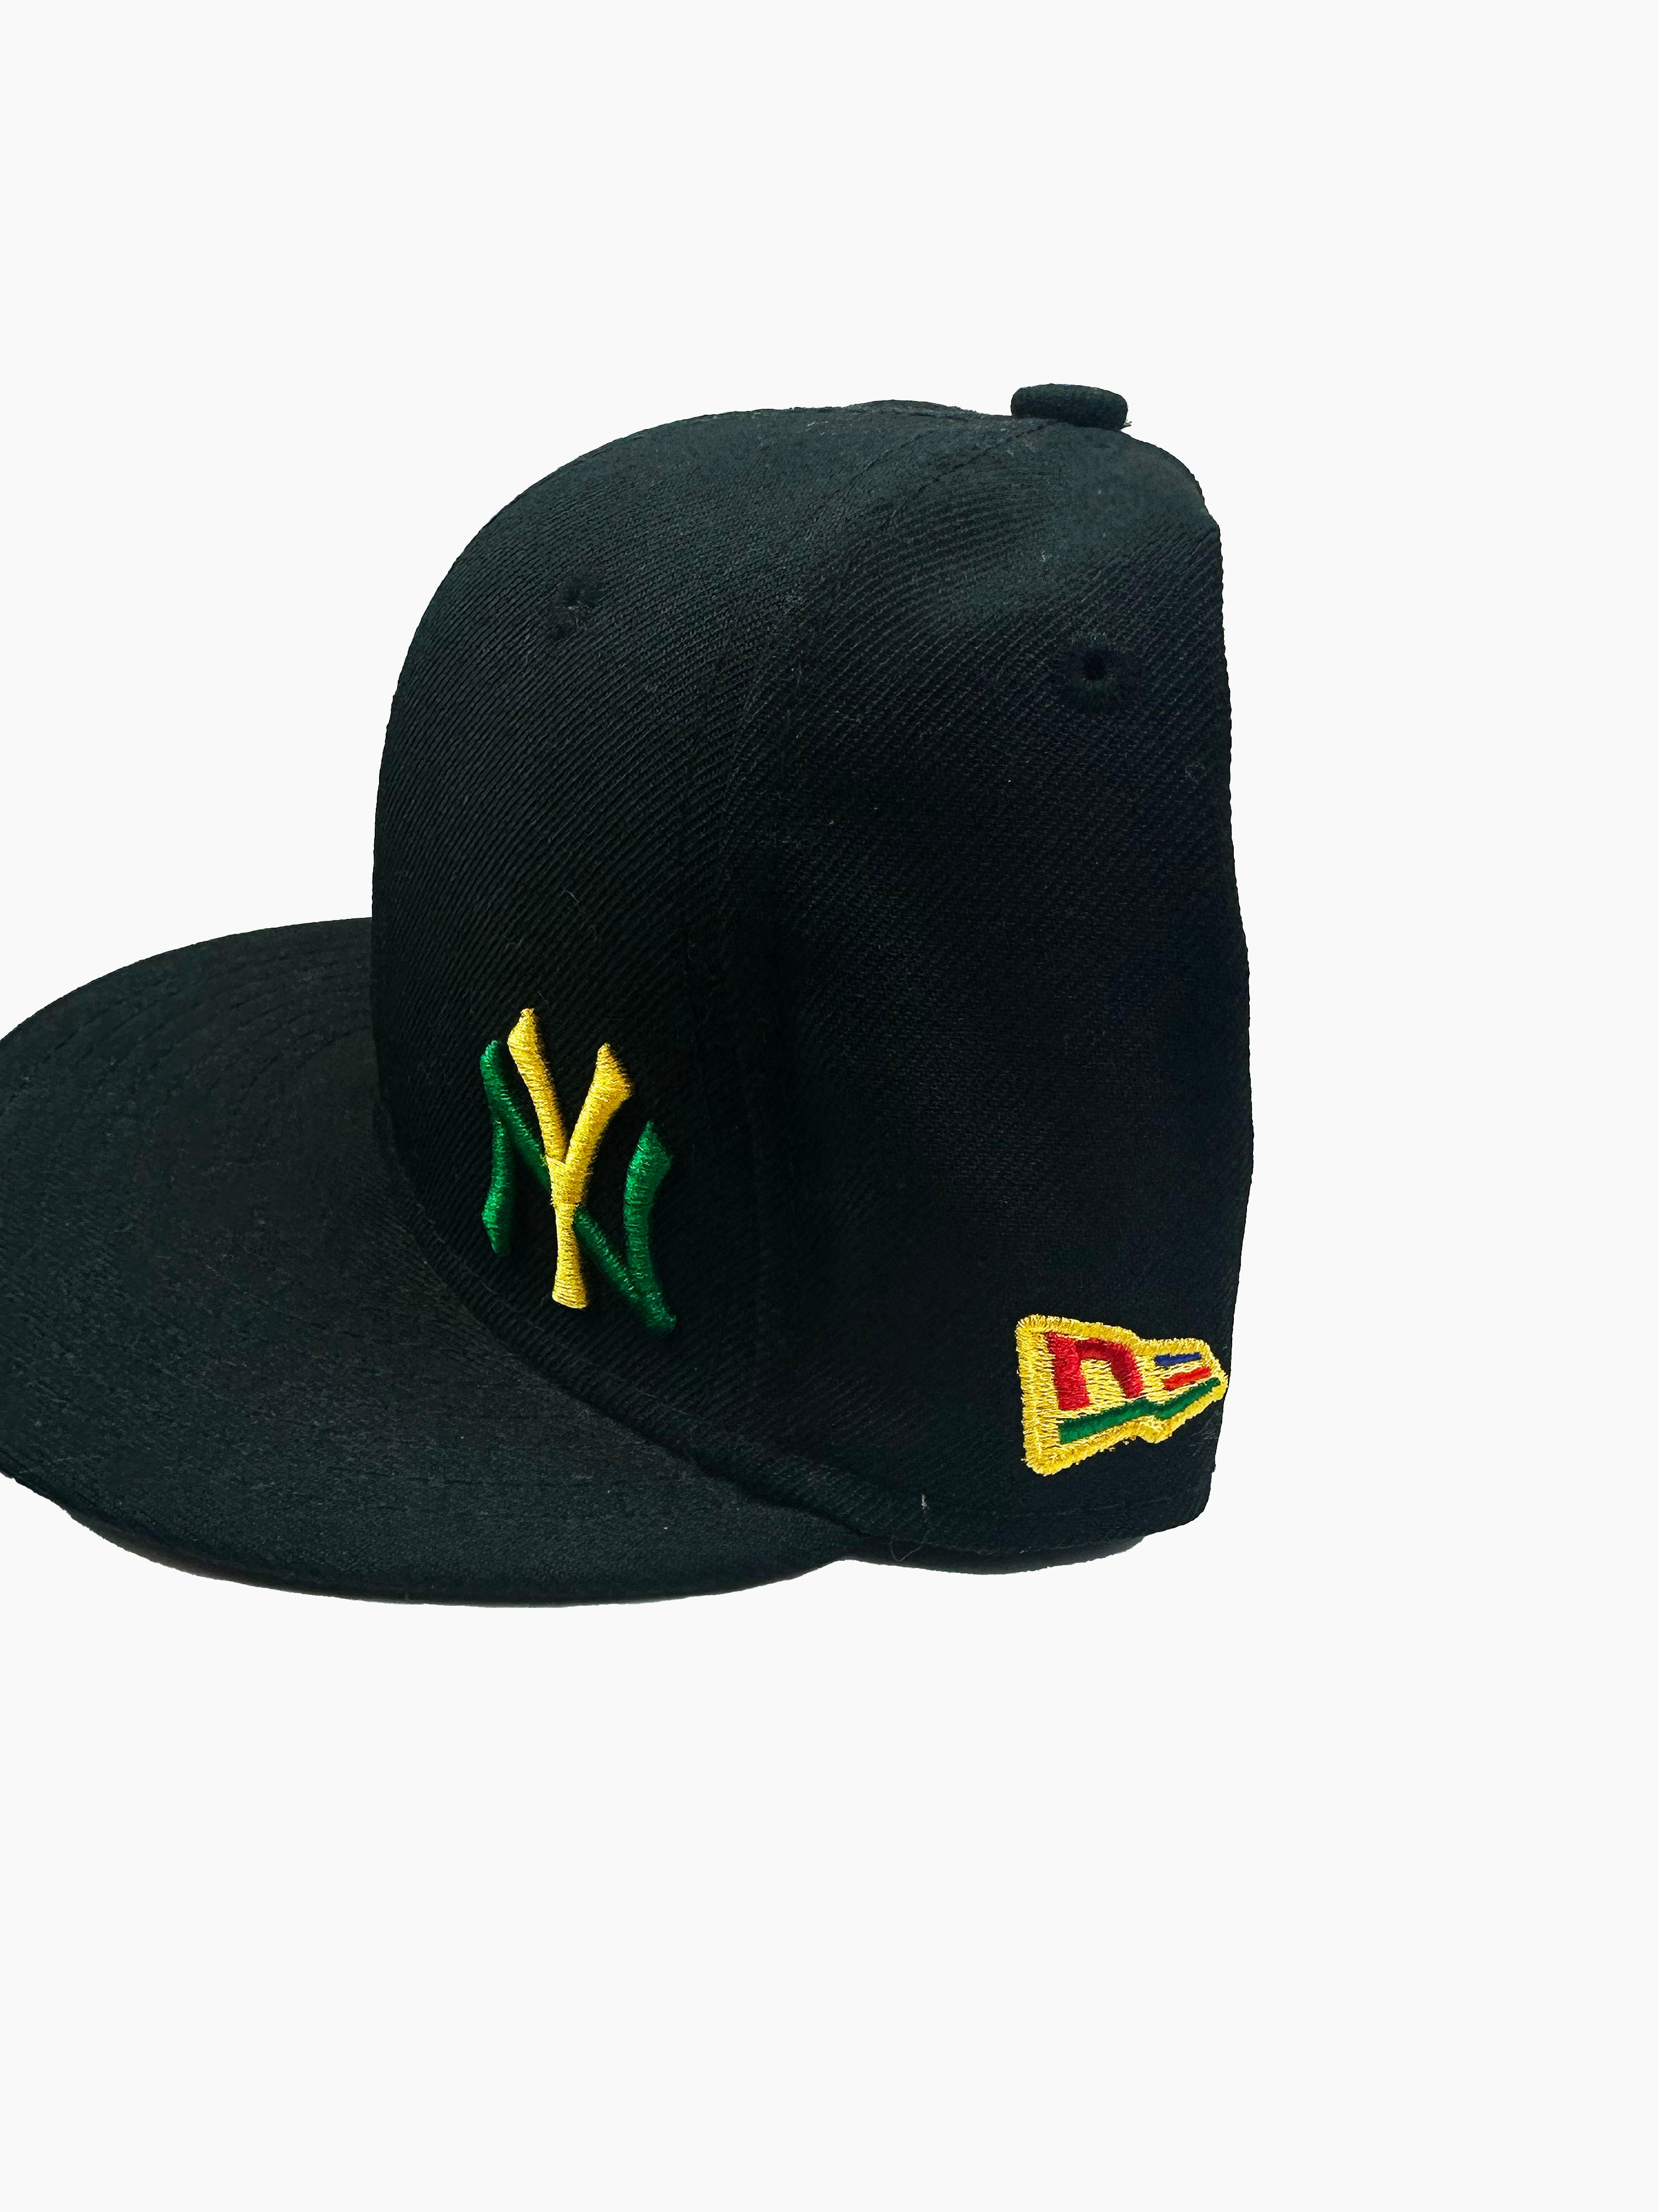 New Era Jamaica Queens Limited Edition Hat 00's